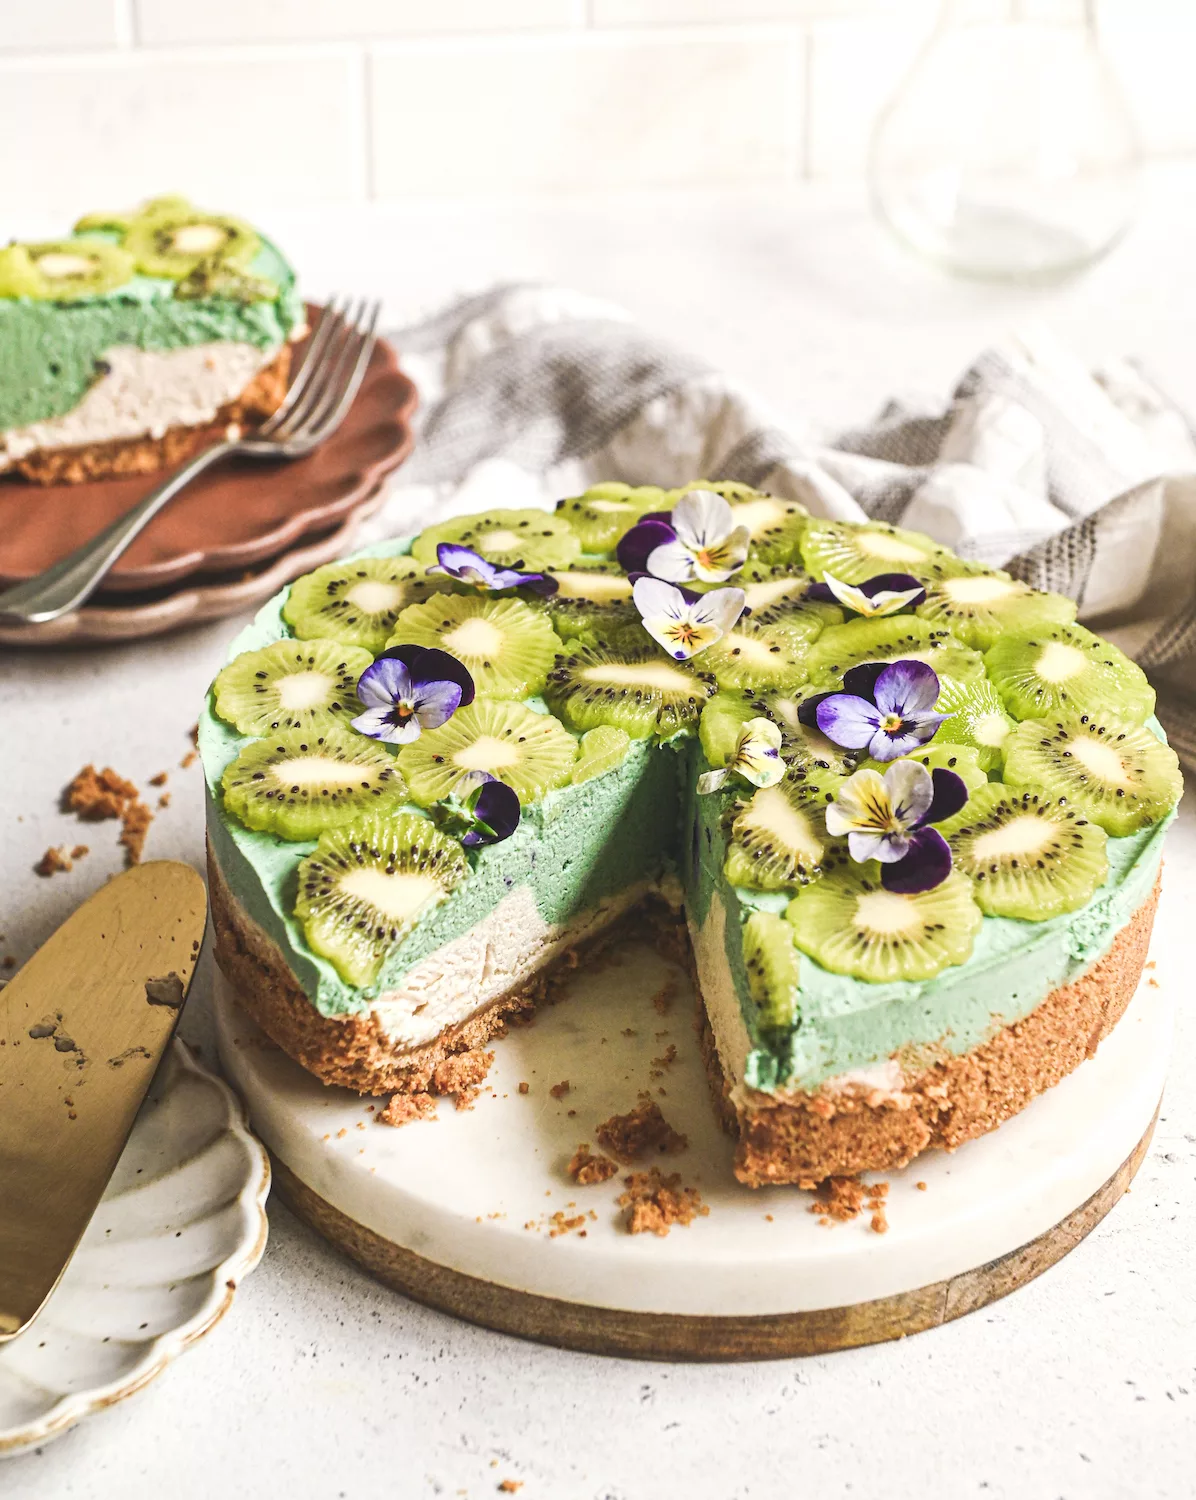 a beautifully decorated raw cheesecake with green and white layers, kiwi slices and edible flowers on top